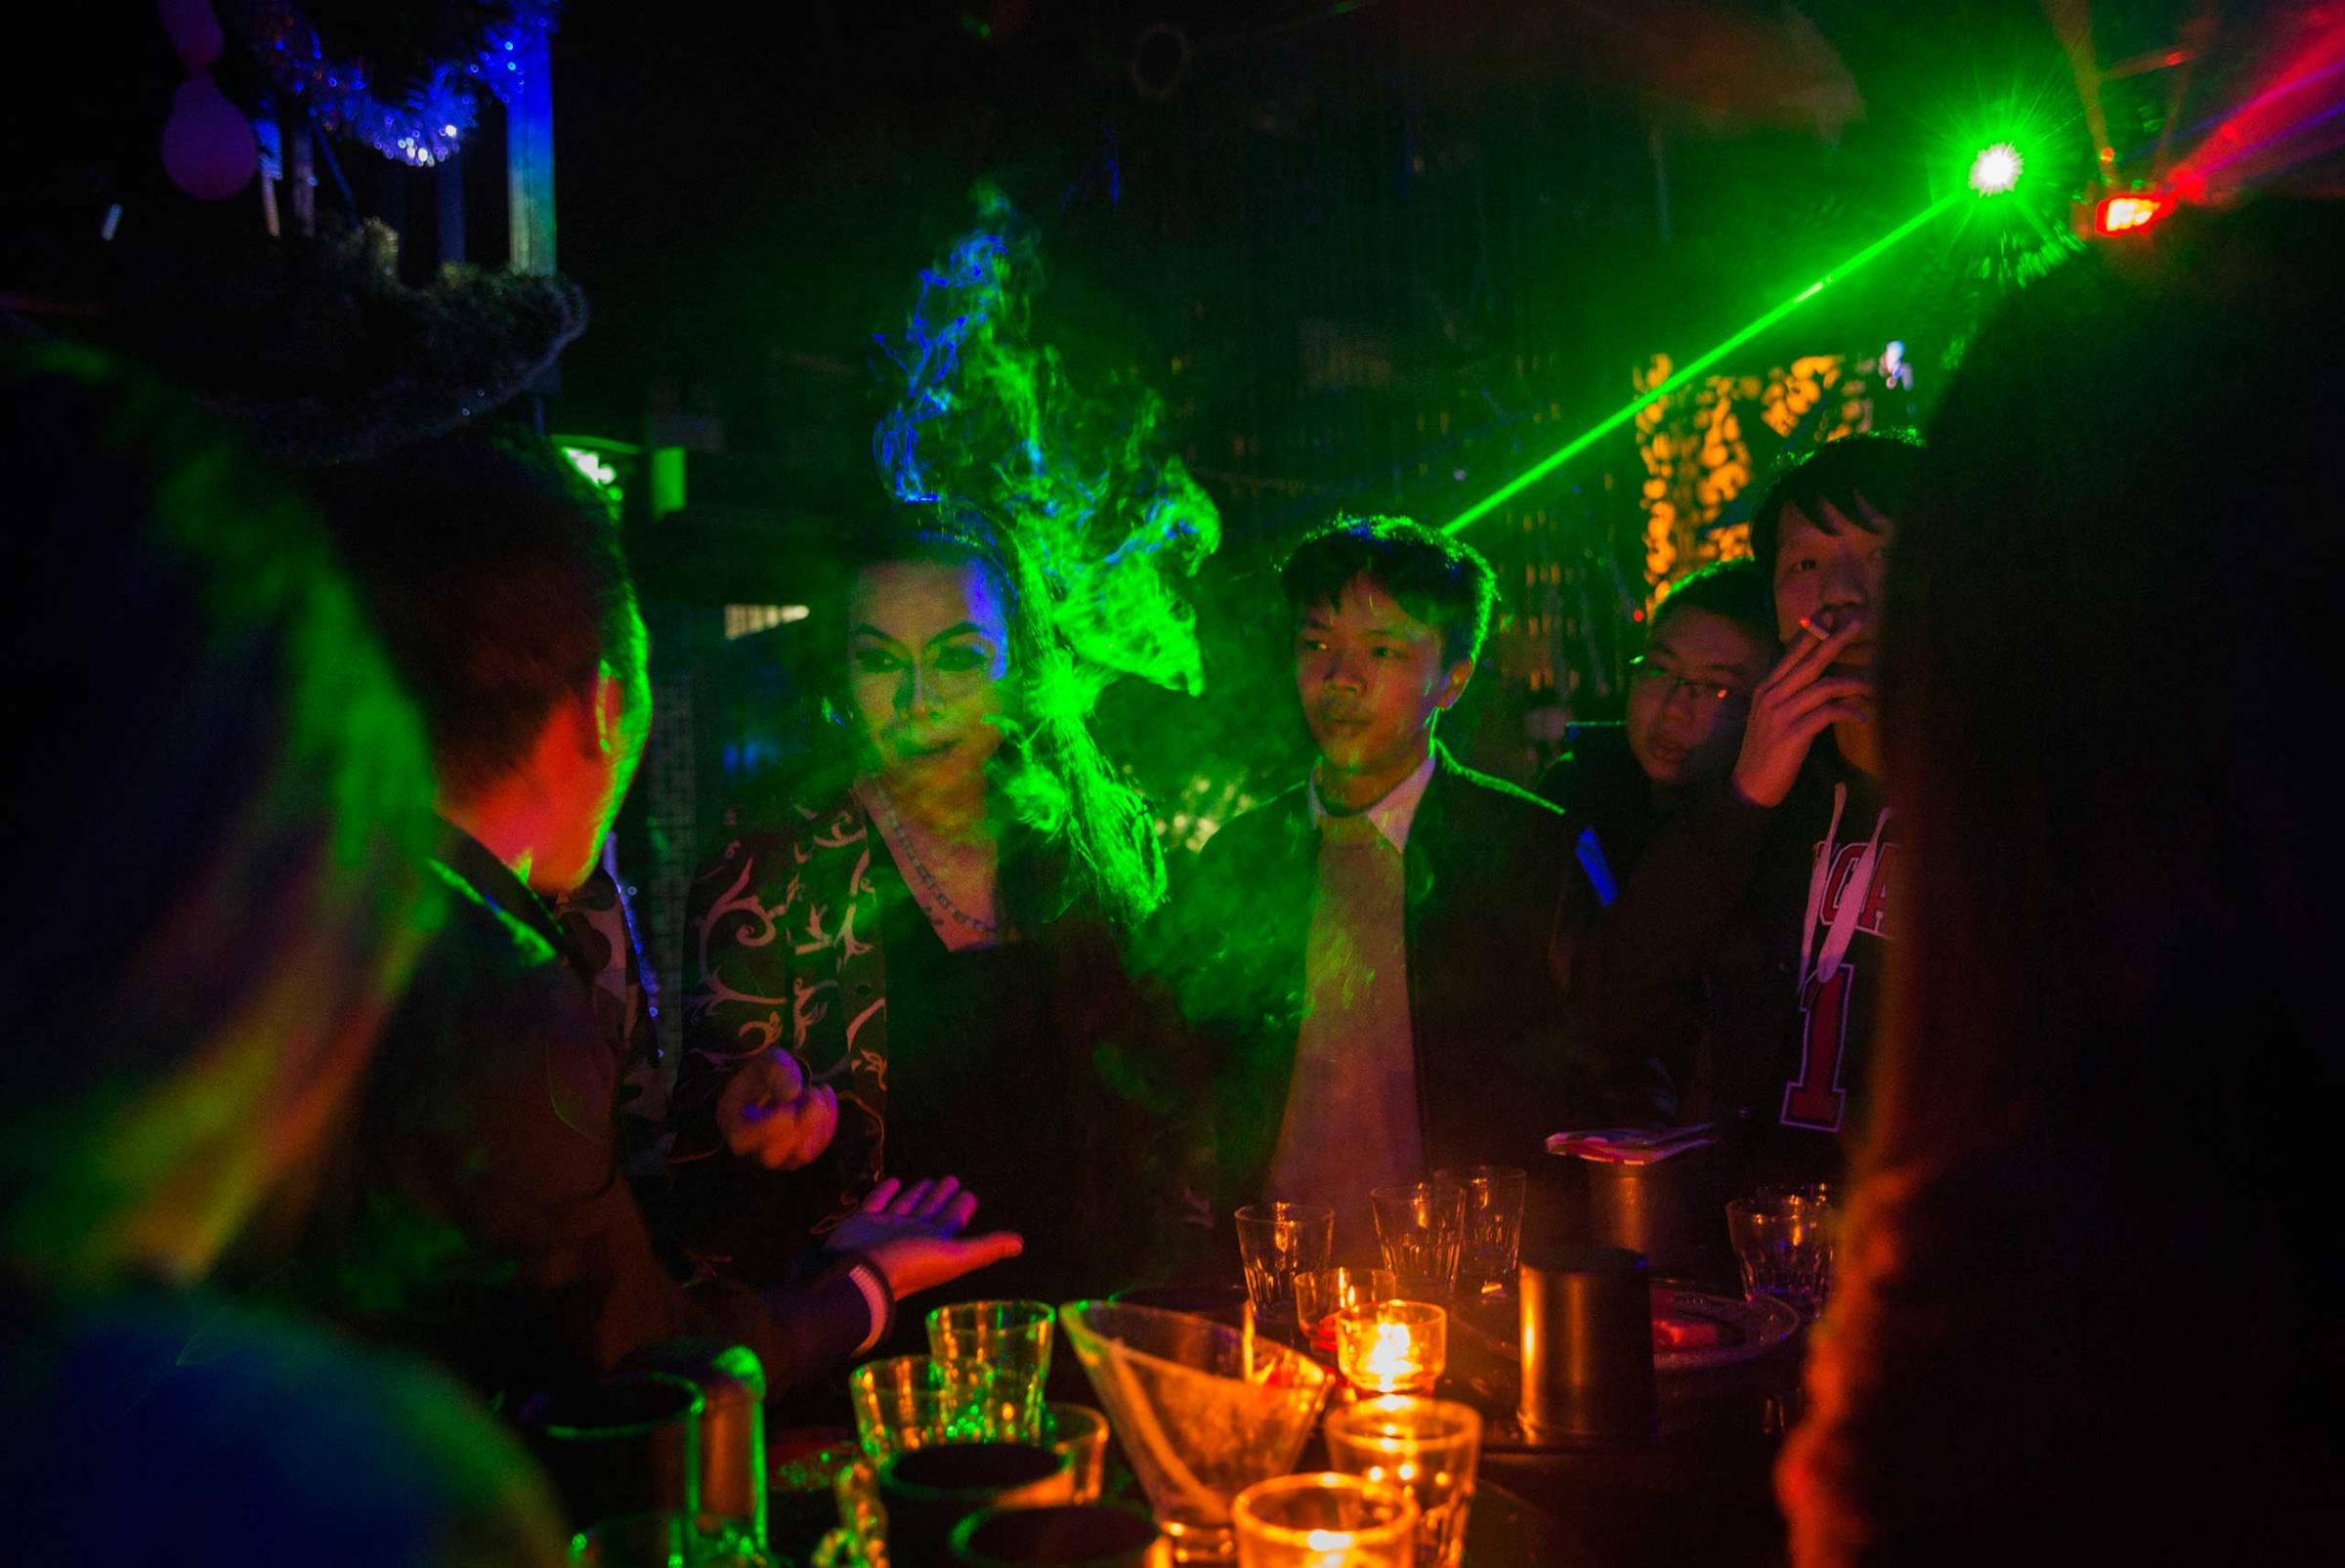 Chinese drag queen who goes by the name Shancun, third from left, has a drink with customers after performing at the Chunai 98 club in Nanning, Guangxi Province, southern China, on Jan. 10, 2015.